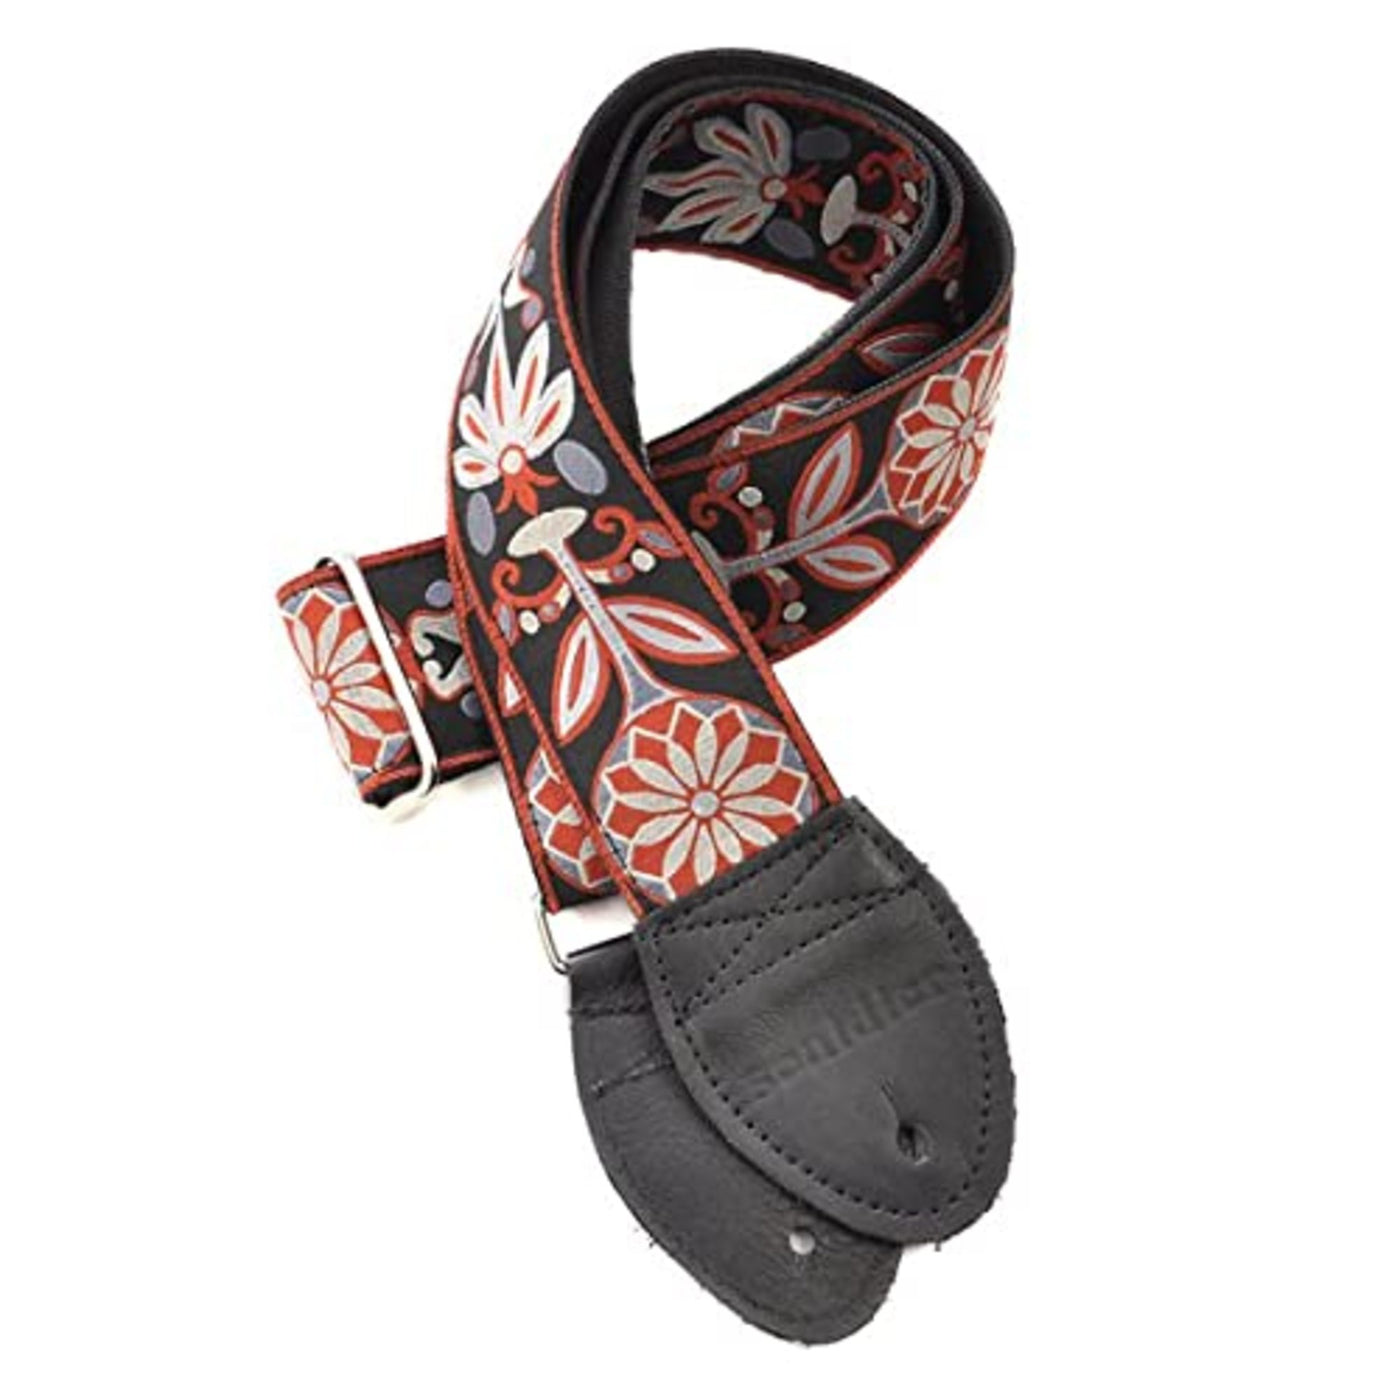 Souldier GS0082BK02BK - Handmade Seatbelt Guitar Strap for Bass, Electric or Acoustic Guitar, 2 Inches Wide and Adjustable Length from 30" to 63"  Made in the USA, Daisy, Grey